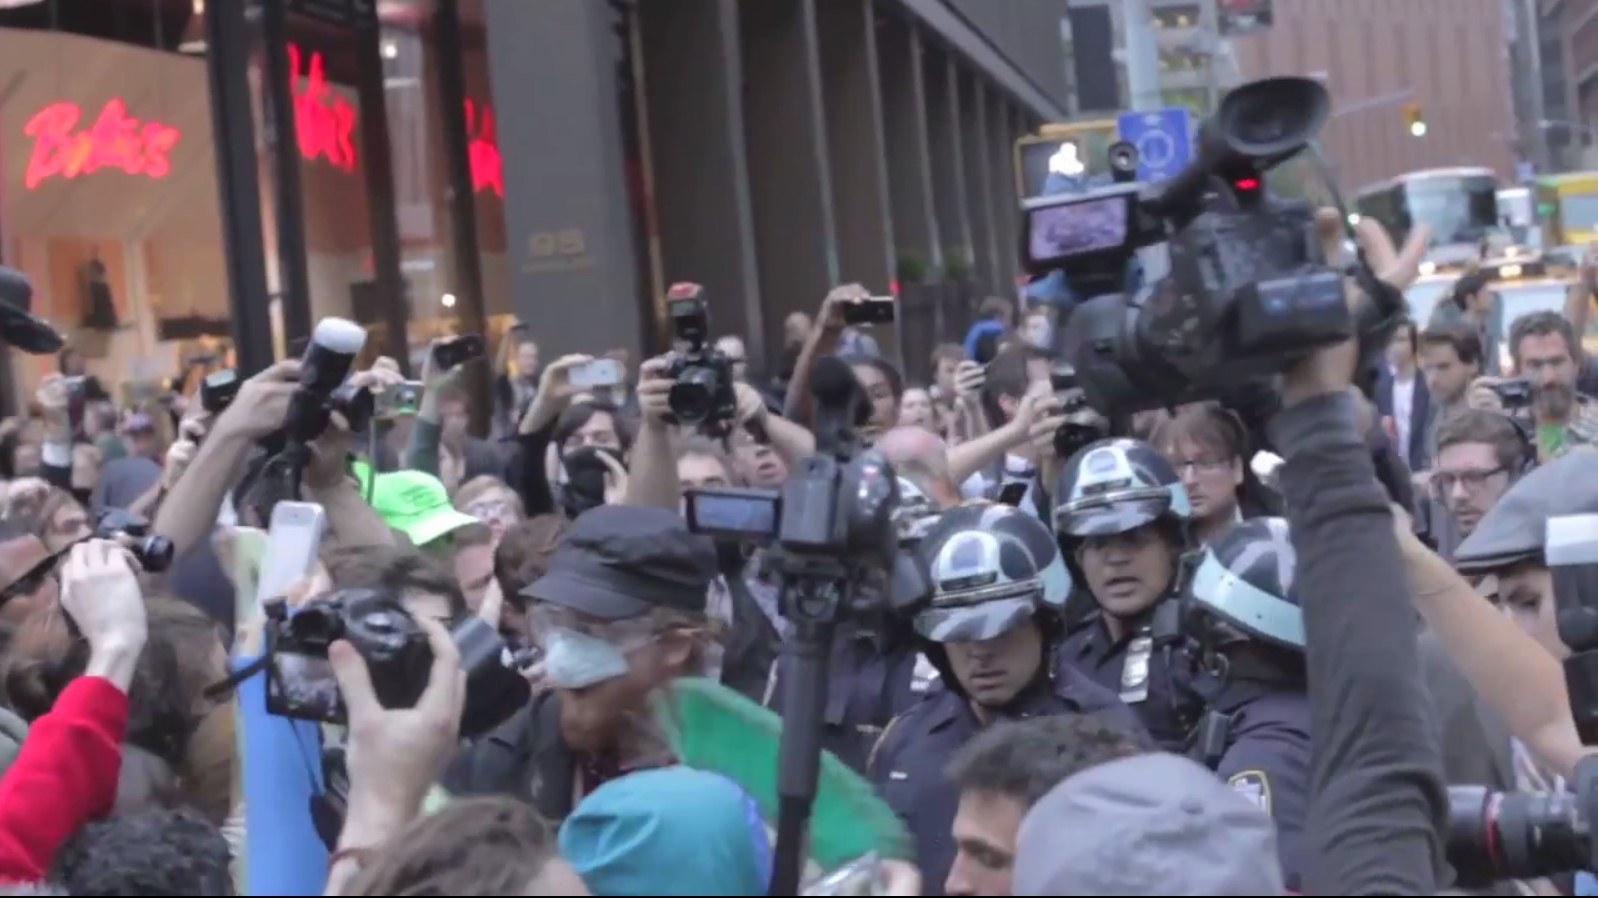 A sea of cameras. Screen capture of “Occupy Wall Street: The Whole World is Watching,” Archive.org,